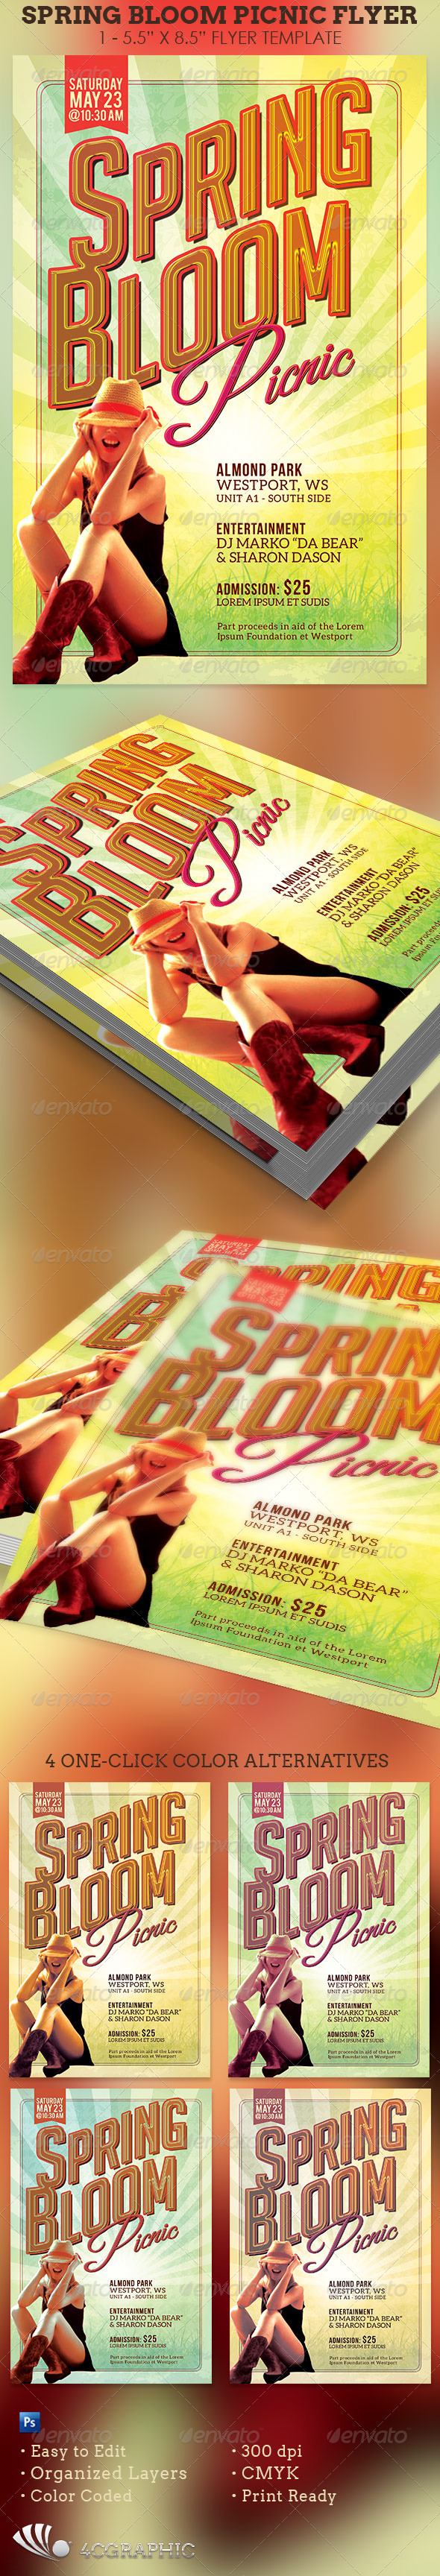 GraphicRiver Spring Bloom Picnic Flyer Template 7641605